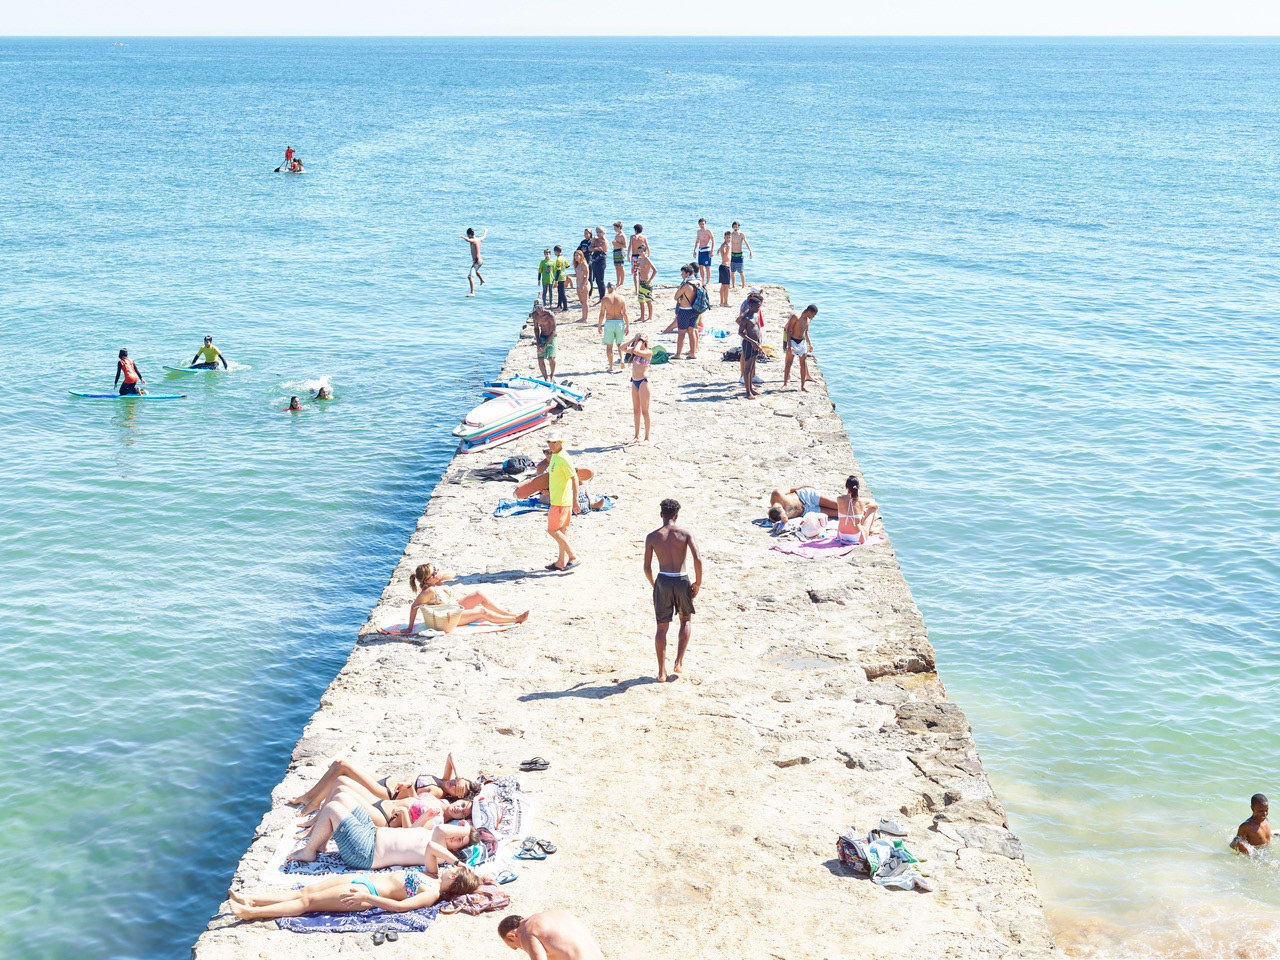 Carcavalos Pier in Portugal with people of all ages sunbathing and diving off pier into blue ocean, by Massimo Vitali